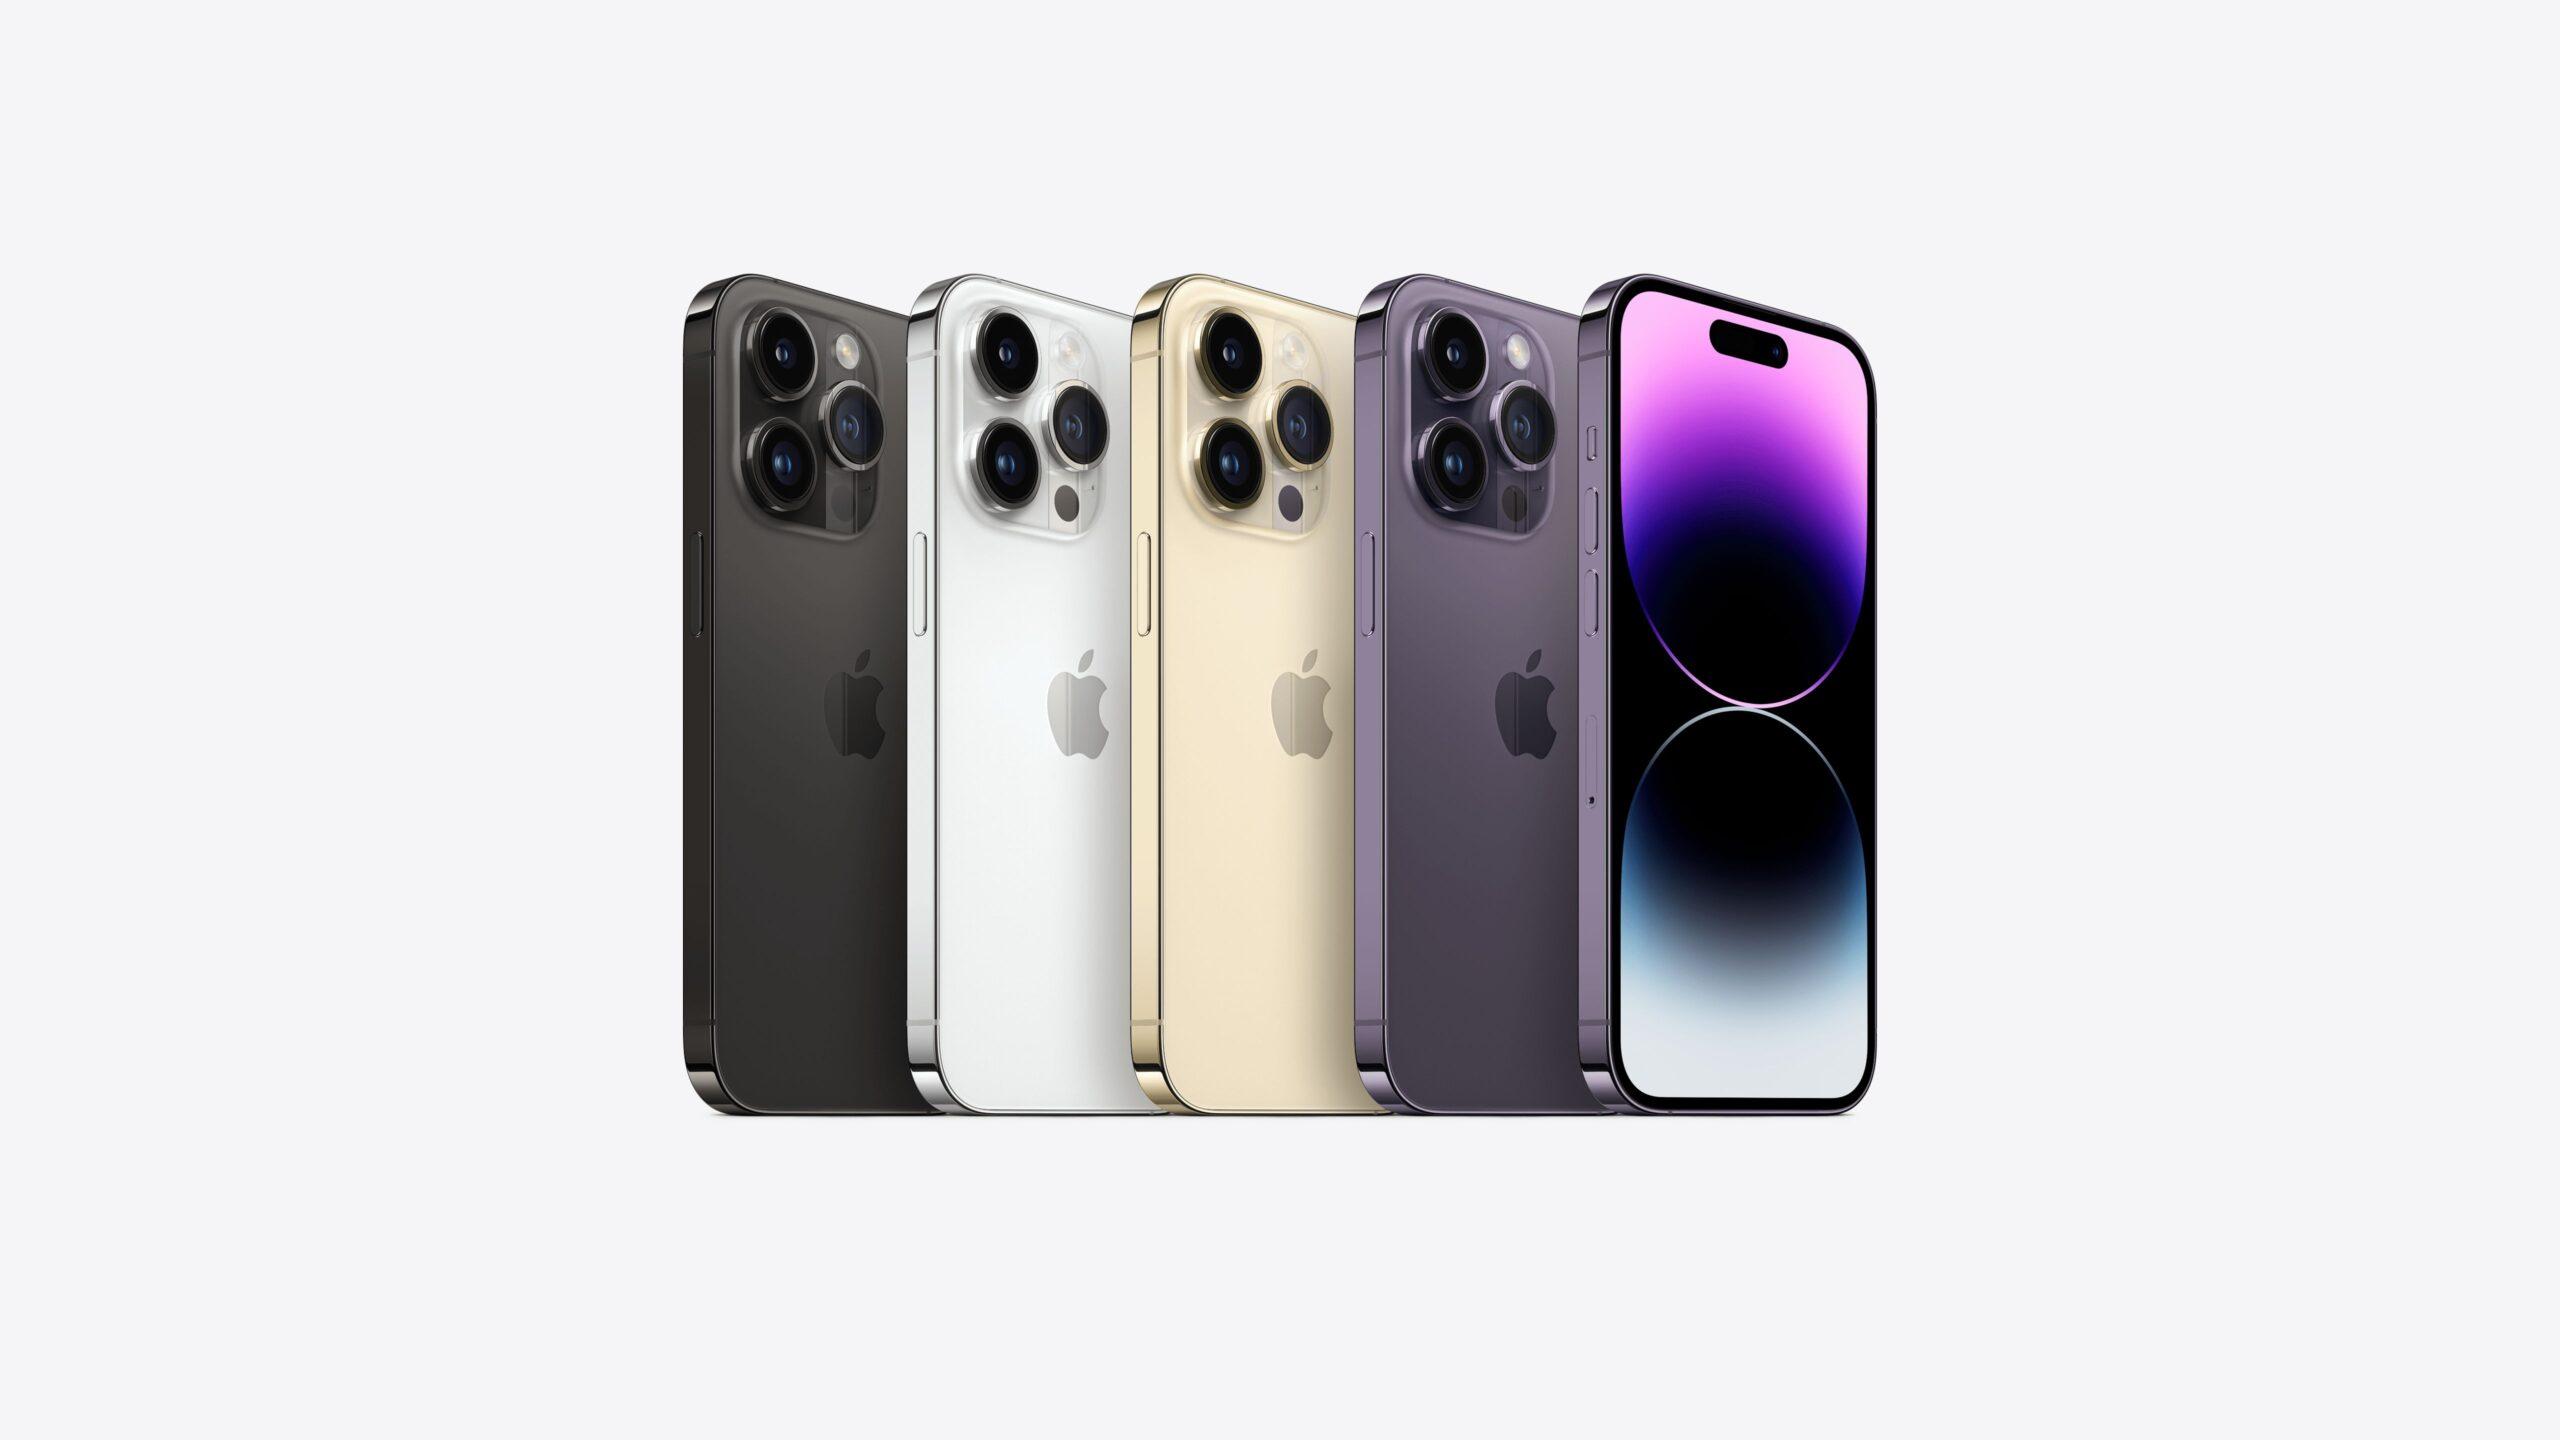 Apple iPhone 14 and iPhone 14 Pro series 2022